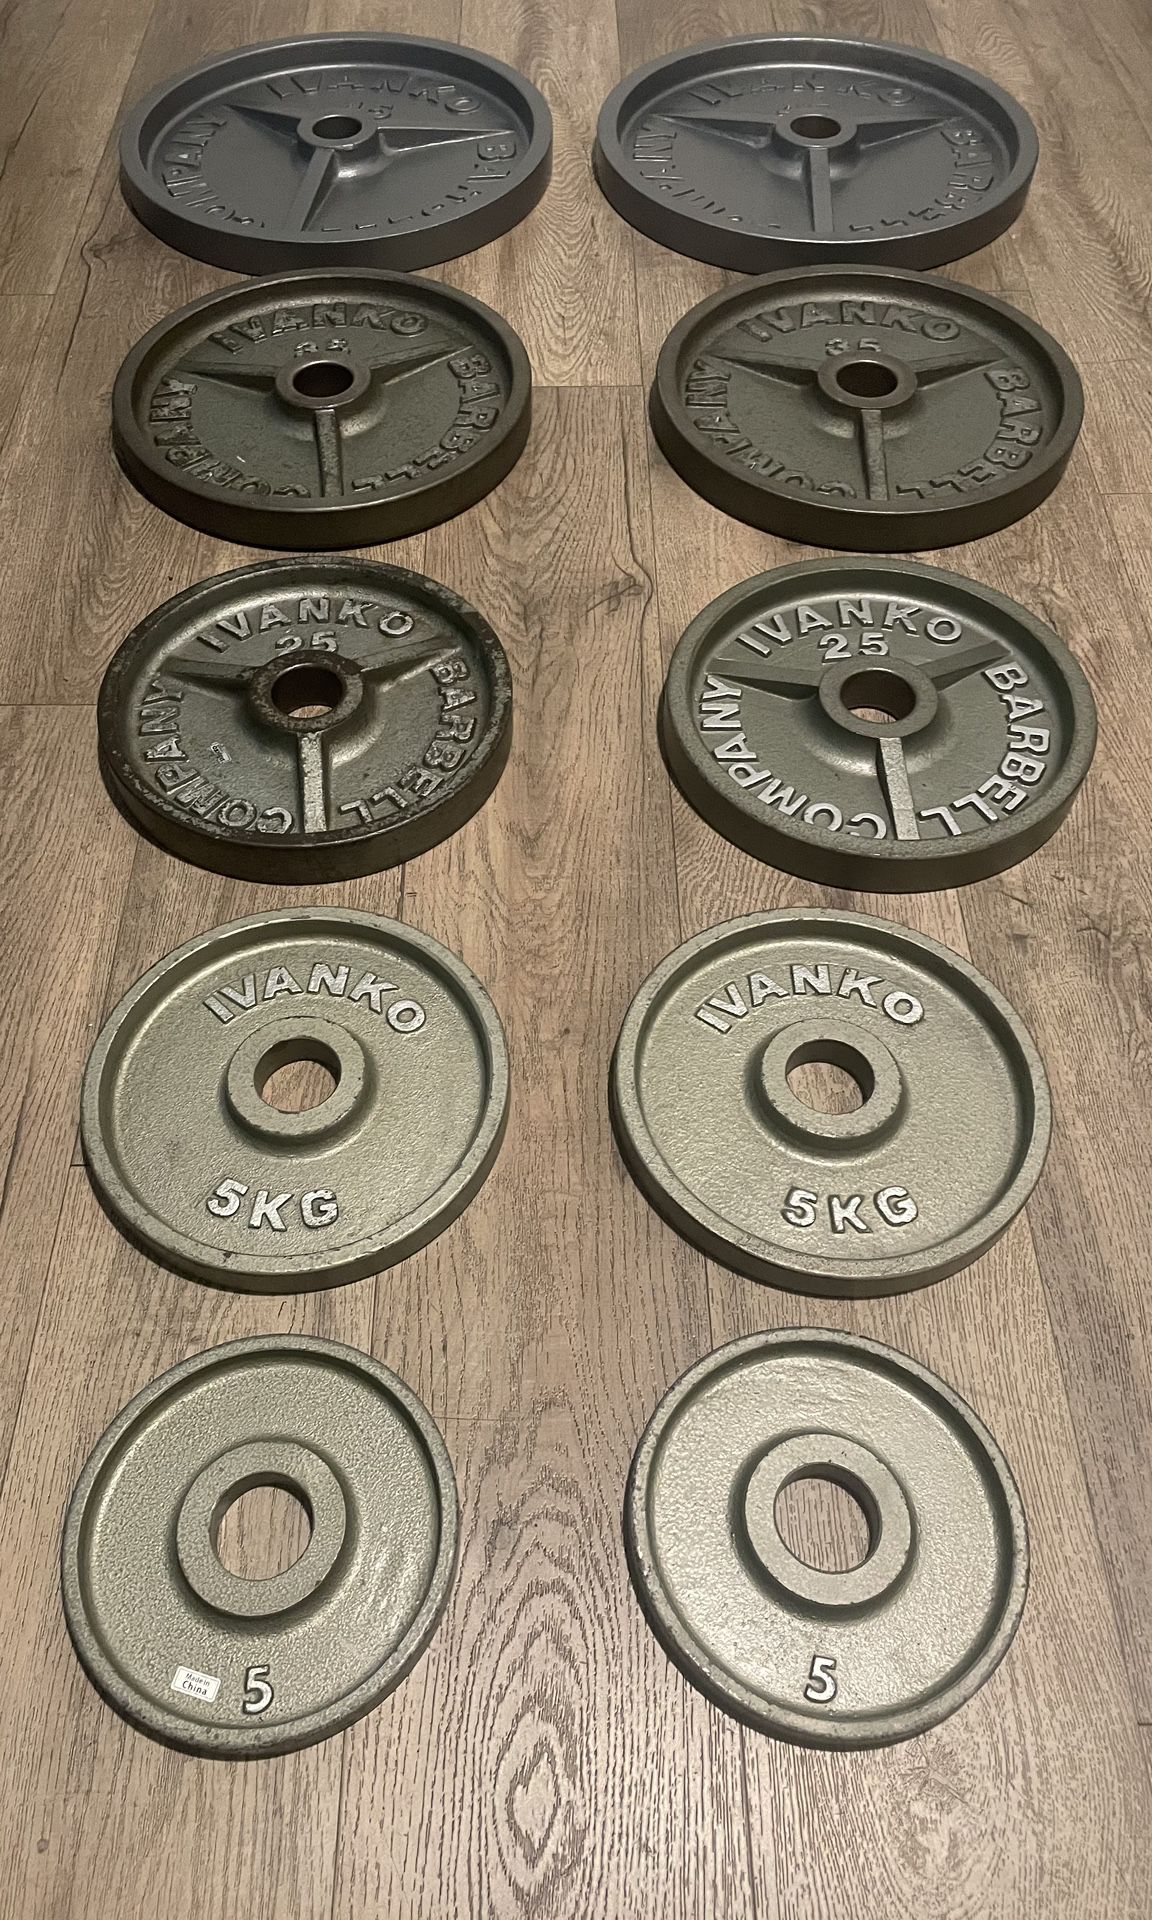 IVANKO FULL SET [Classic Olympic “M” Series] Of Weight Plates; Total: 242 lb